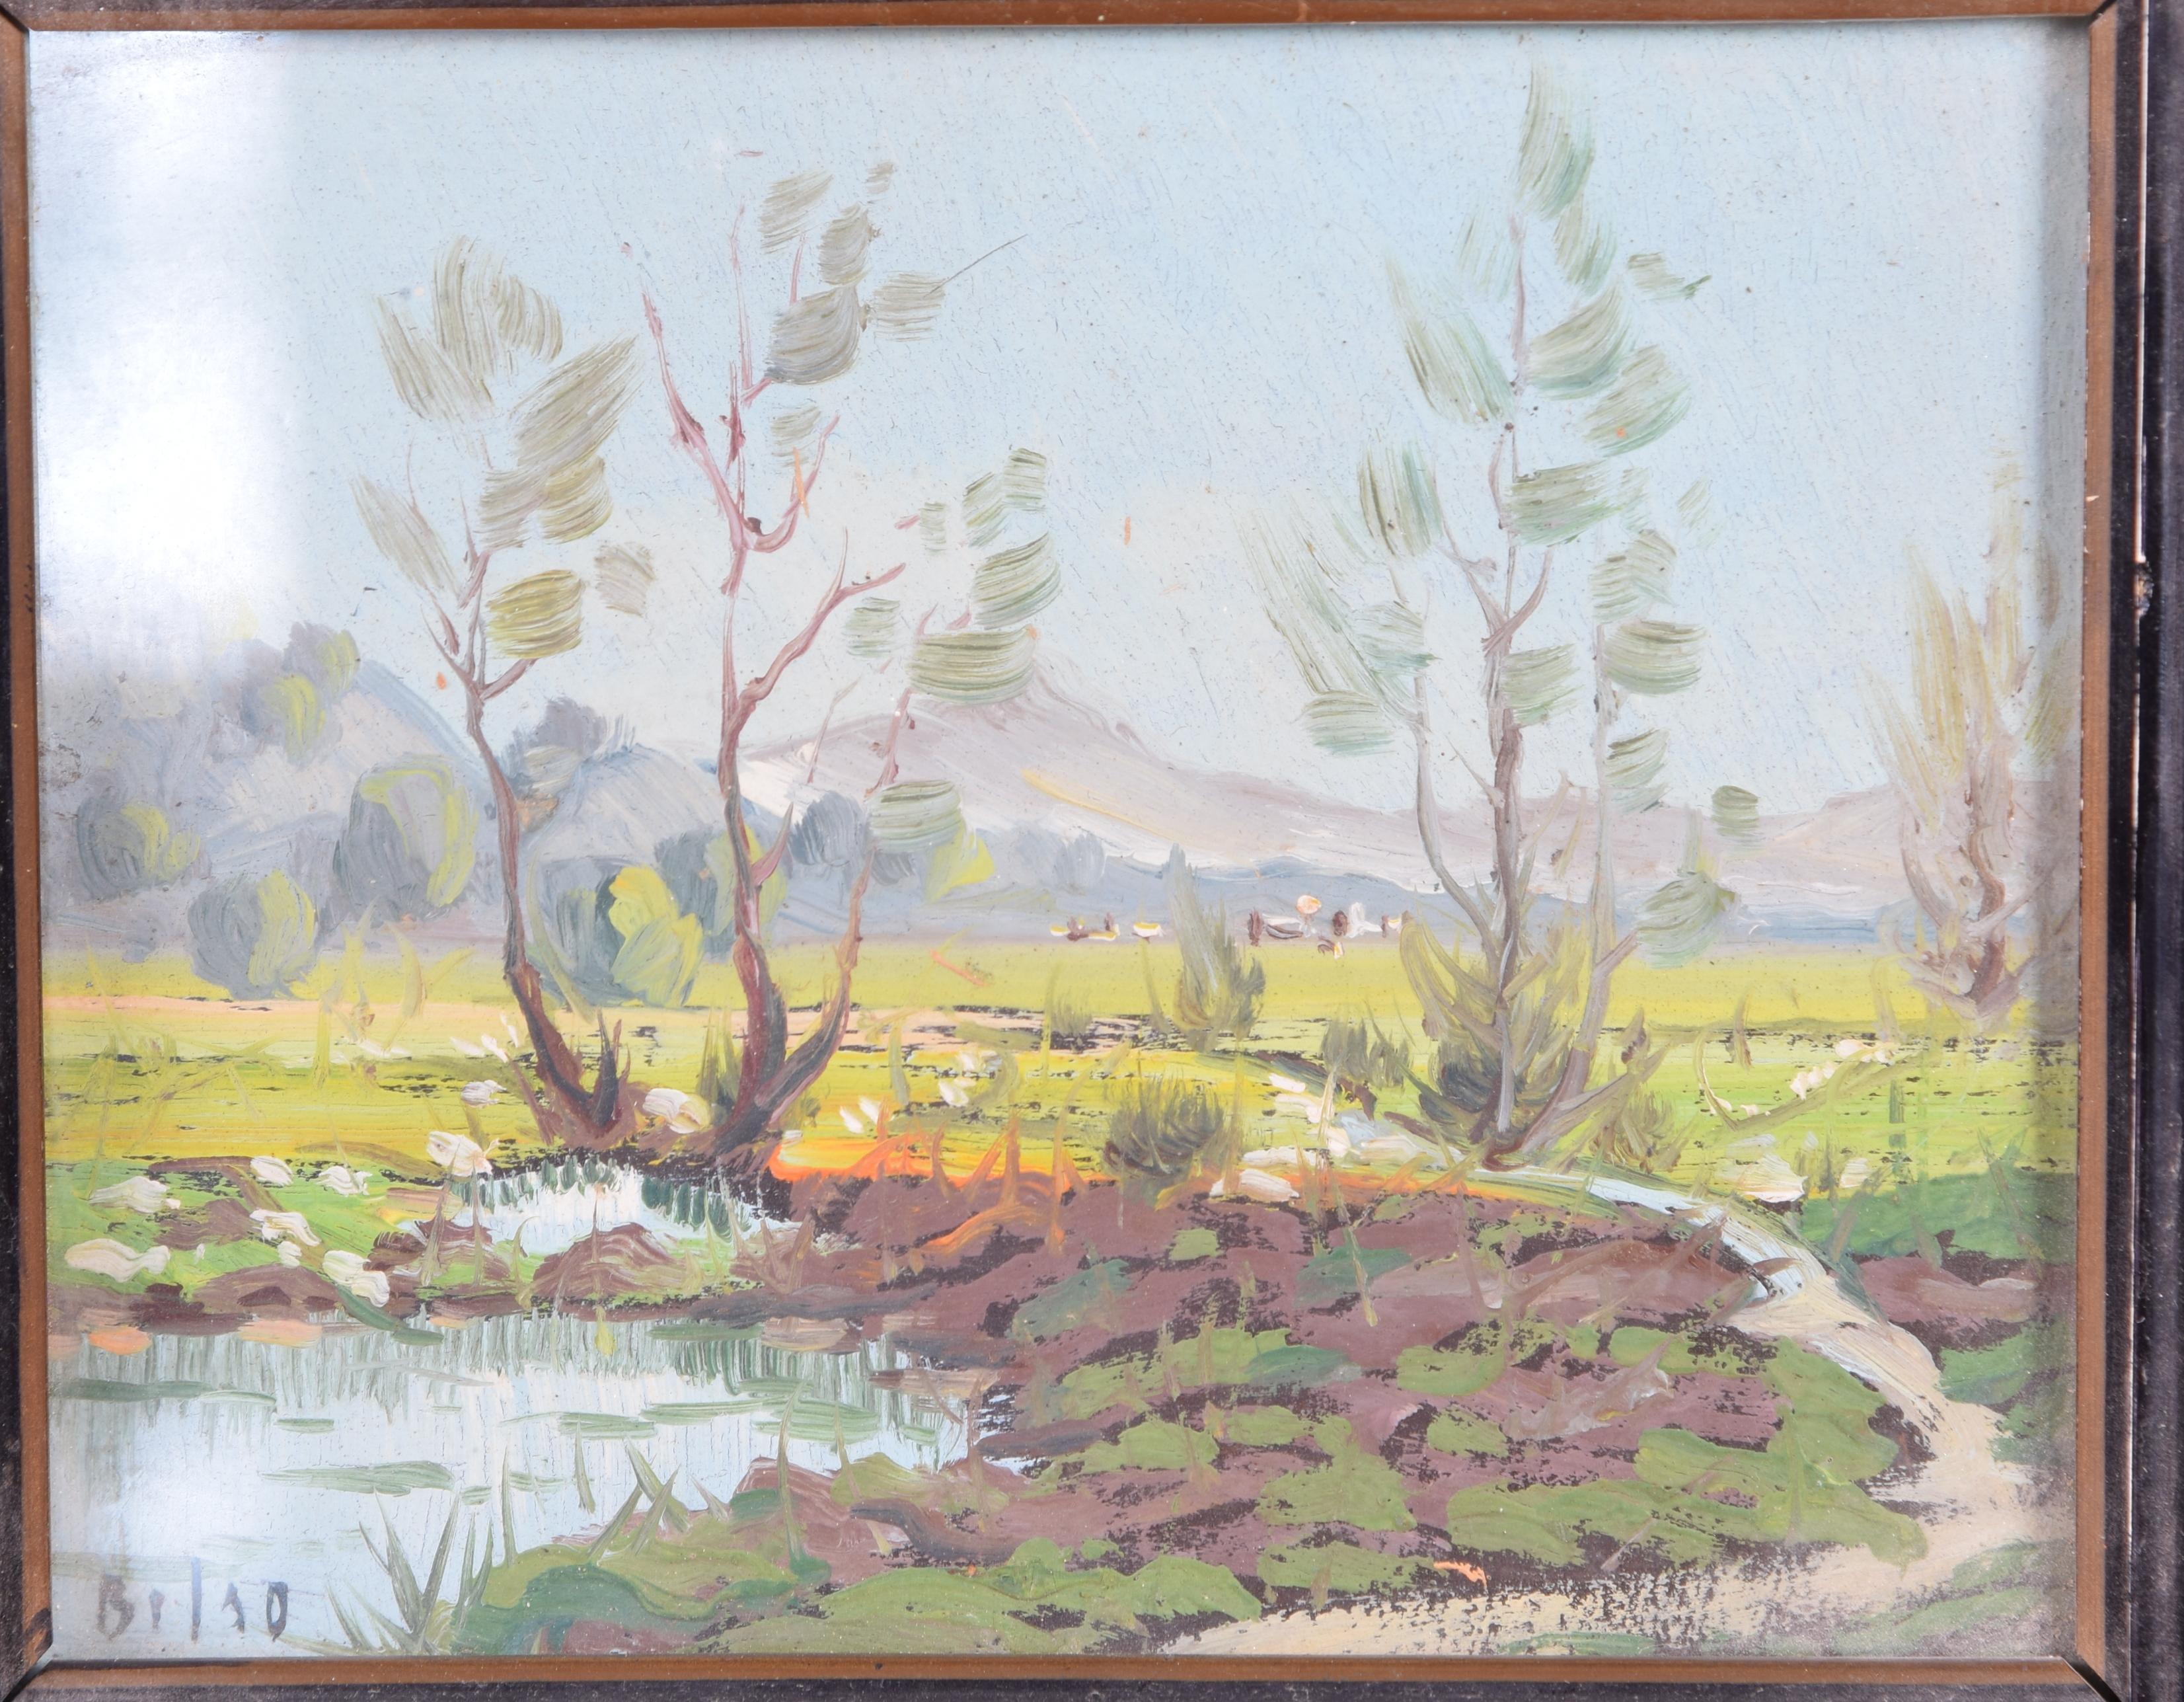 Couple of landscapes. Oil on canvas. Spanish school (BILSO), 20th century. 
Signed in the lower corners. 
Pair of landscapes or notes of rural landscapes with trees, mountains and buildings, etc., which appear signed “BILSO” (lower left corner;